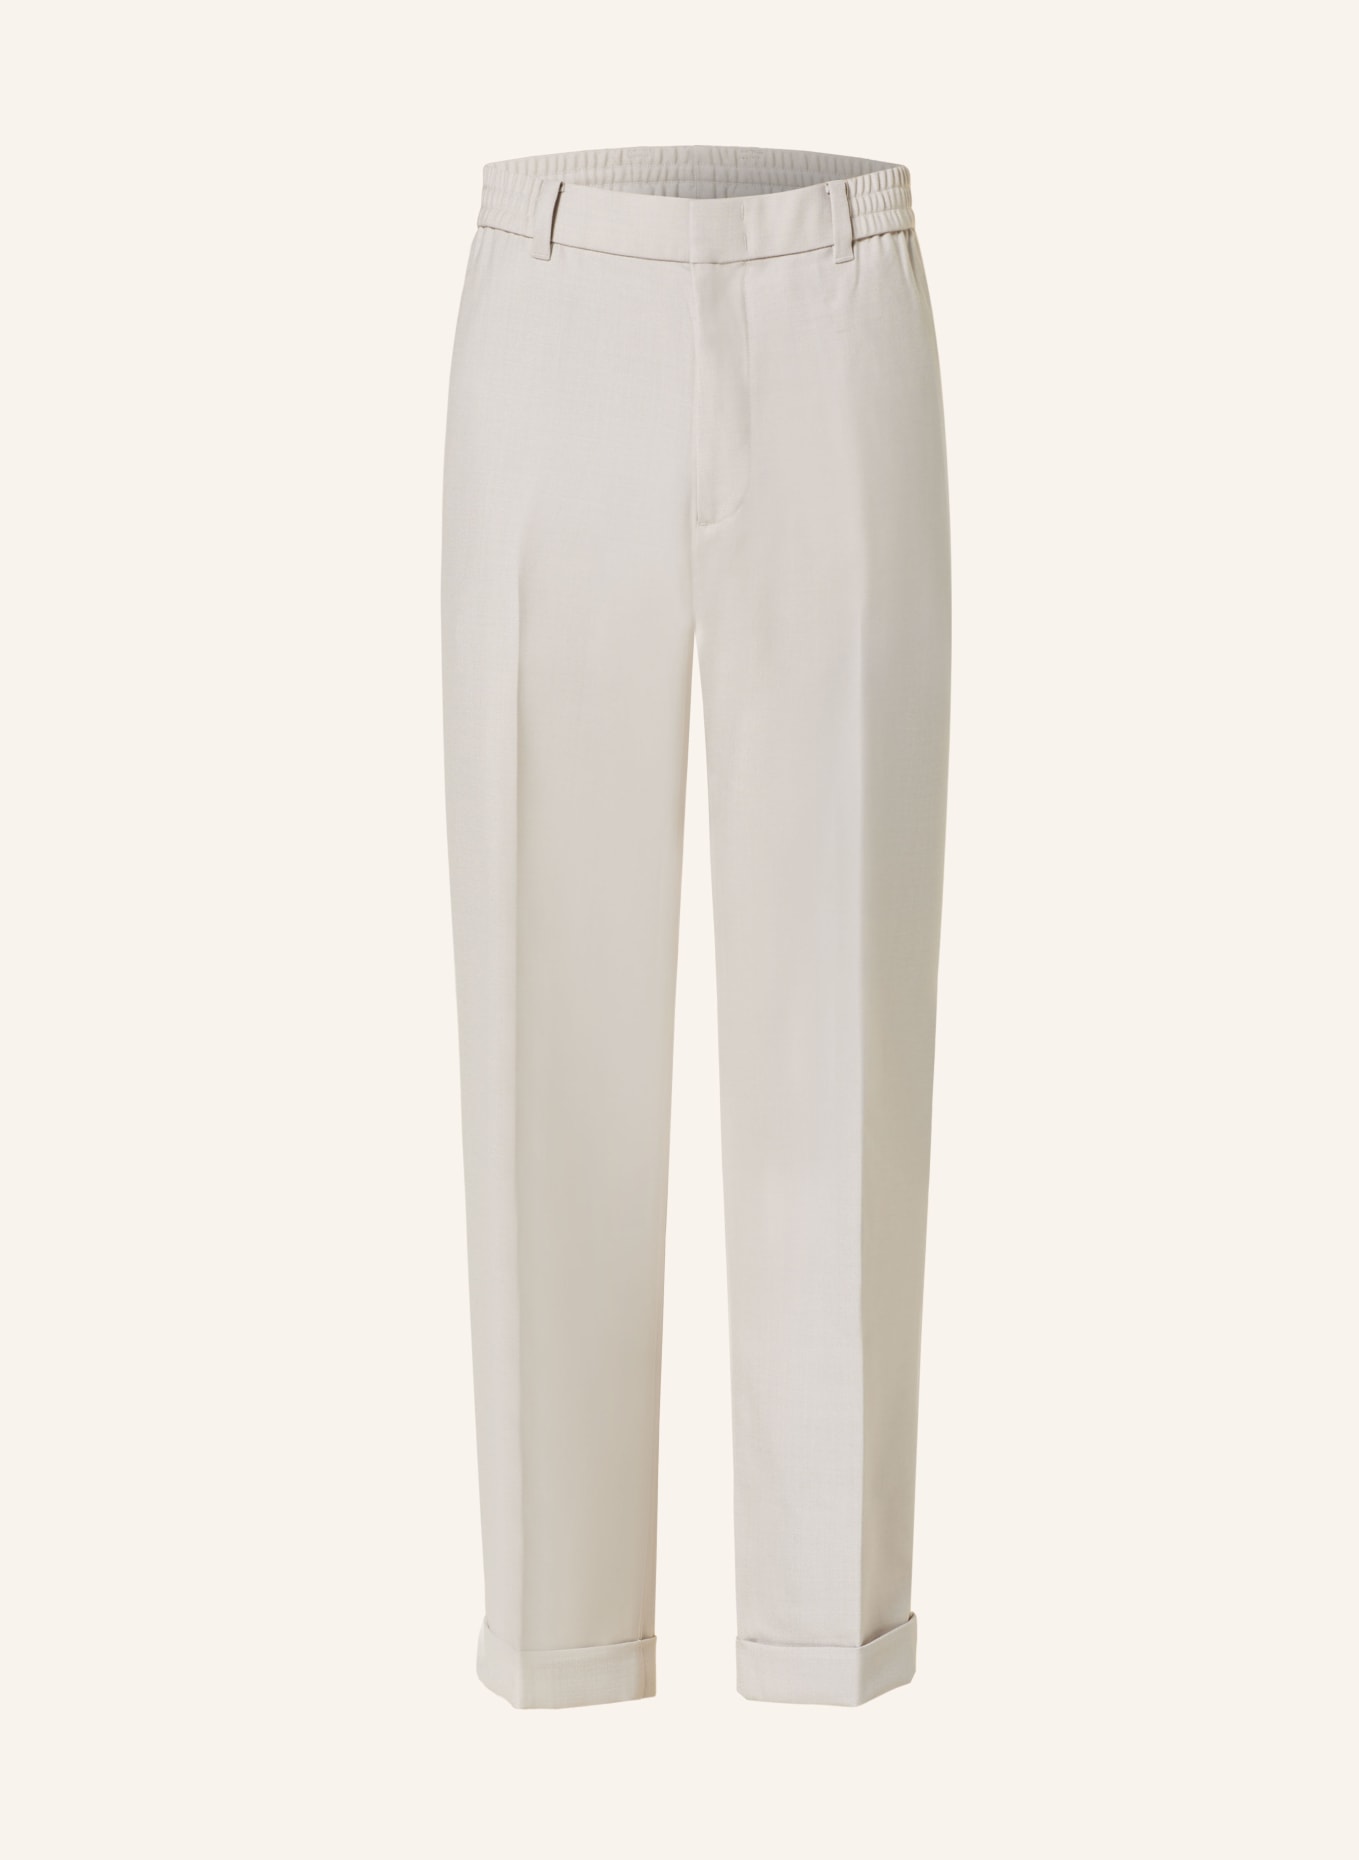 COS Trousers in jogger style relaxed straight fit, Color: LIGHT GRAY (Image 1)